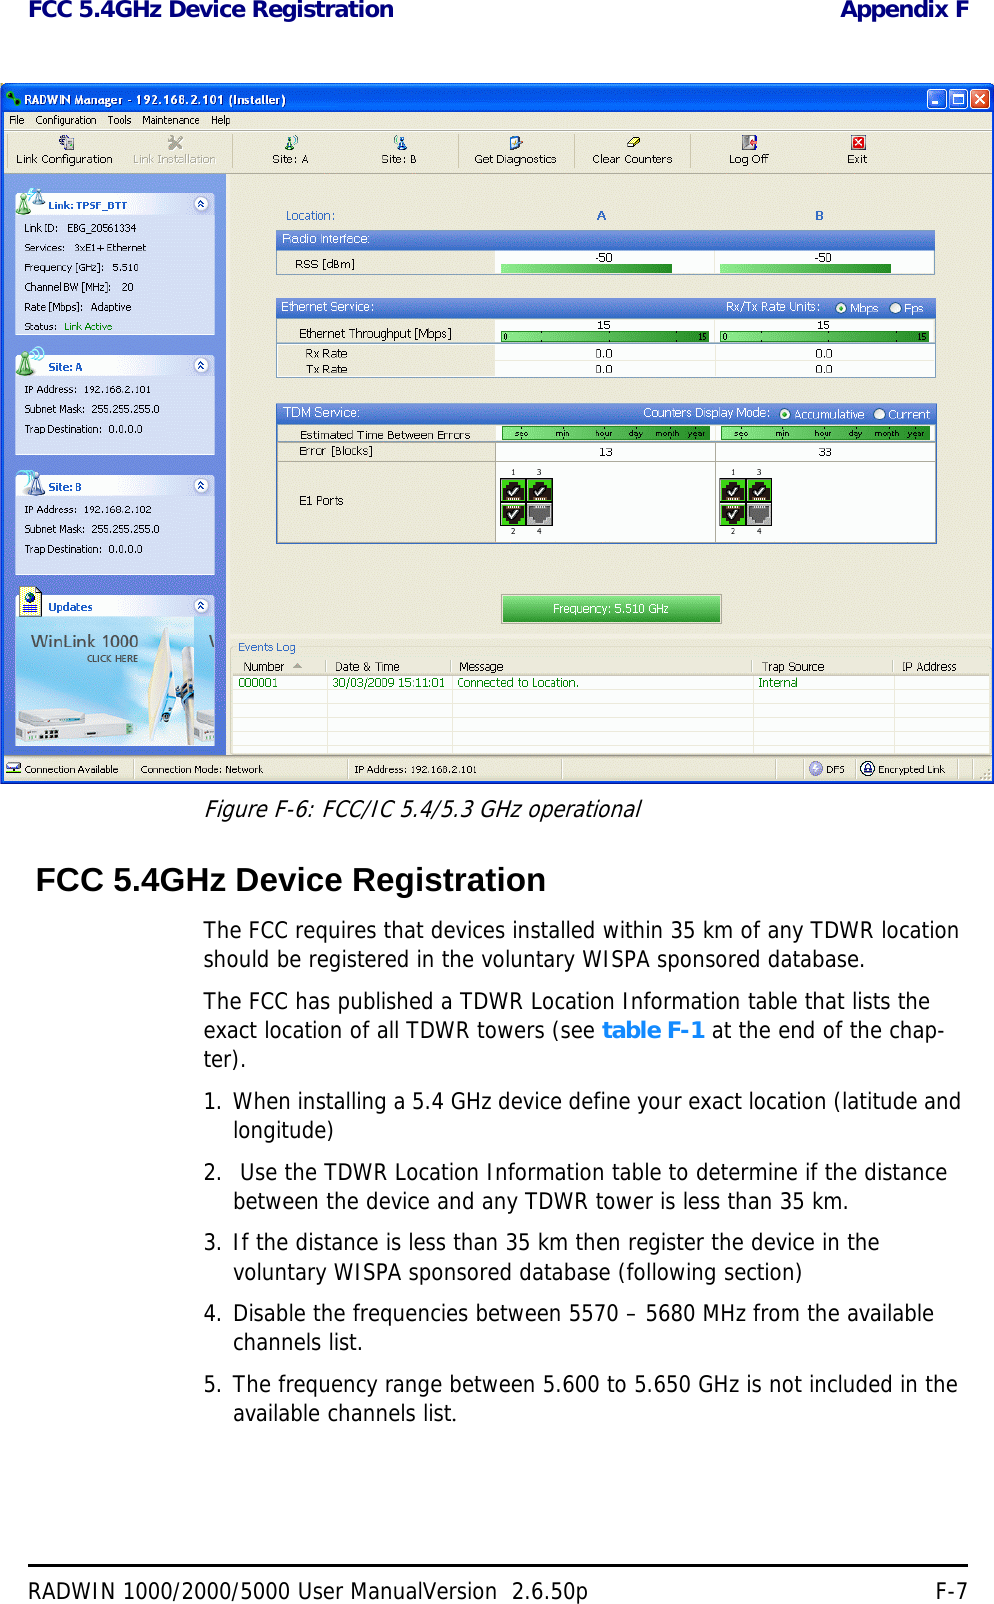 FCC 5.4GHz Device Registration Appendix FRADWIN 1000/2000/5000 User ManualVersion  2.6.50p F-7Figure F-6: FCC/IC 5.4/5.3 GHz operational FCC 5.4GHz Device RegistrationThe FCC requires that devices installed within 35 km of any TDWR location should be registered in the voluntary WISPA sponsored database. The FCC has published a TDWR Location Information table that lists the exact location of all TDWR towers (see table F-1 at the end of the chap-ter).1. When installing a 5.4 GHz device define your exact location (latitude and longitude)2.  Use the TDWR Location Information table to determine if the distance between the device and any TDWR tower is less than 35 km.3. If the distance is less than 35 km then register the device in the voluntary WISPA sponsored database (following section)4. Disable the frequencies between 5570 – 5680 MHz from the available channels list.5. The frequency range between 5.600 to 5.650 GHz is not included in the available channels list.